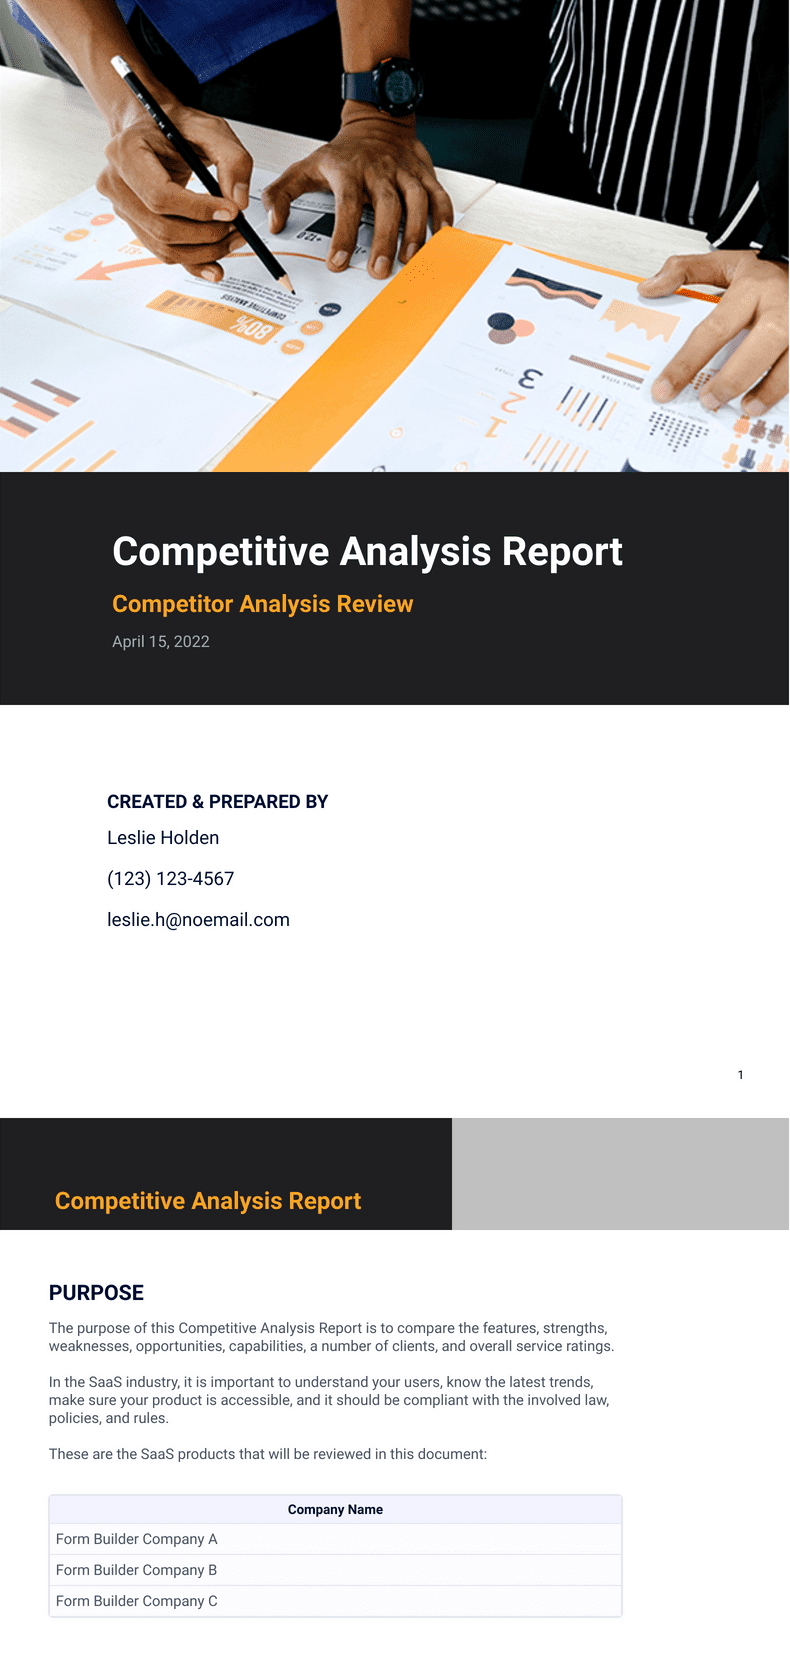 How to Create a Competitor Analysis Report (Templates Included